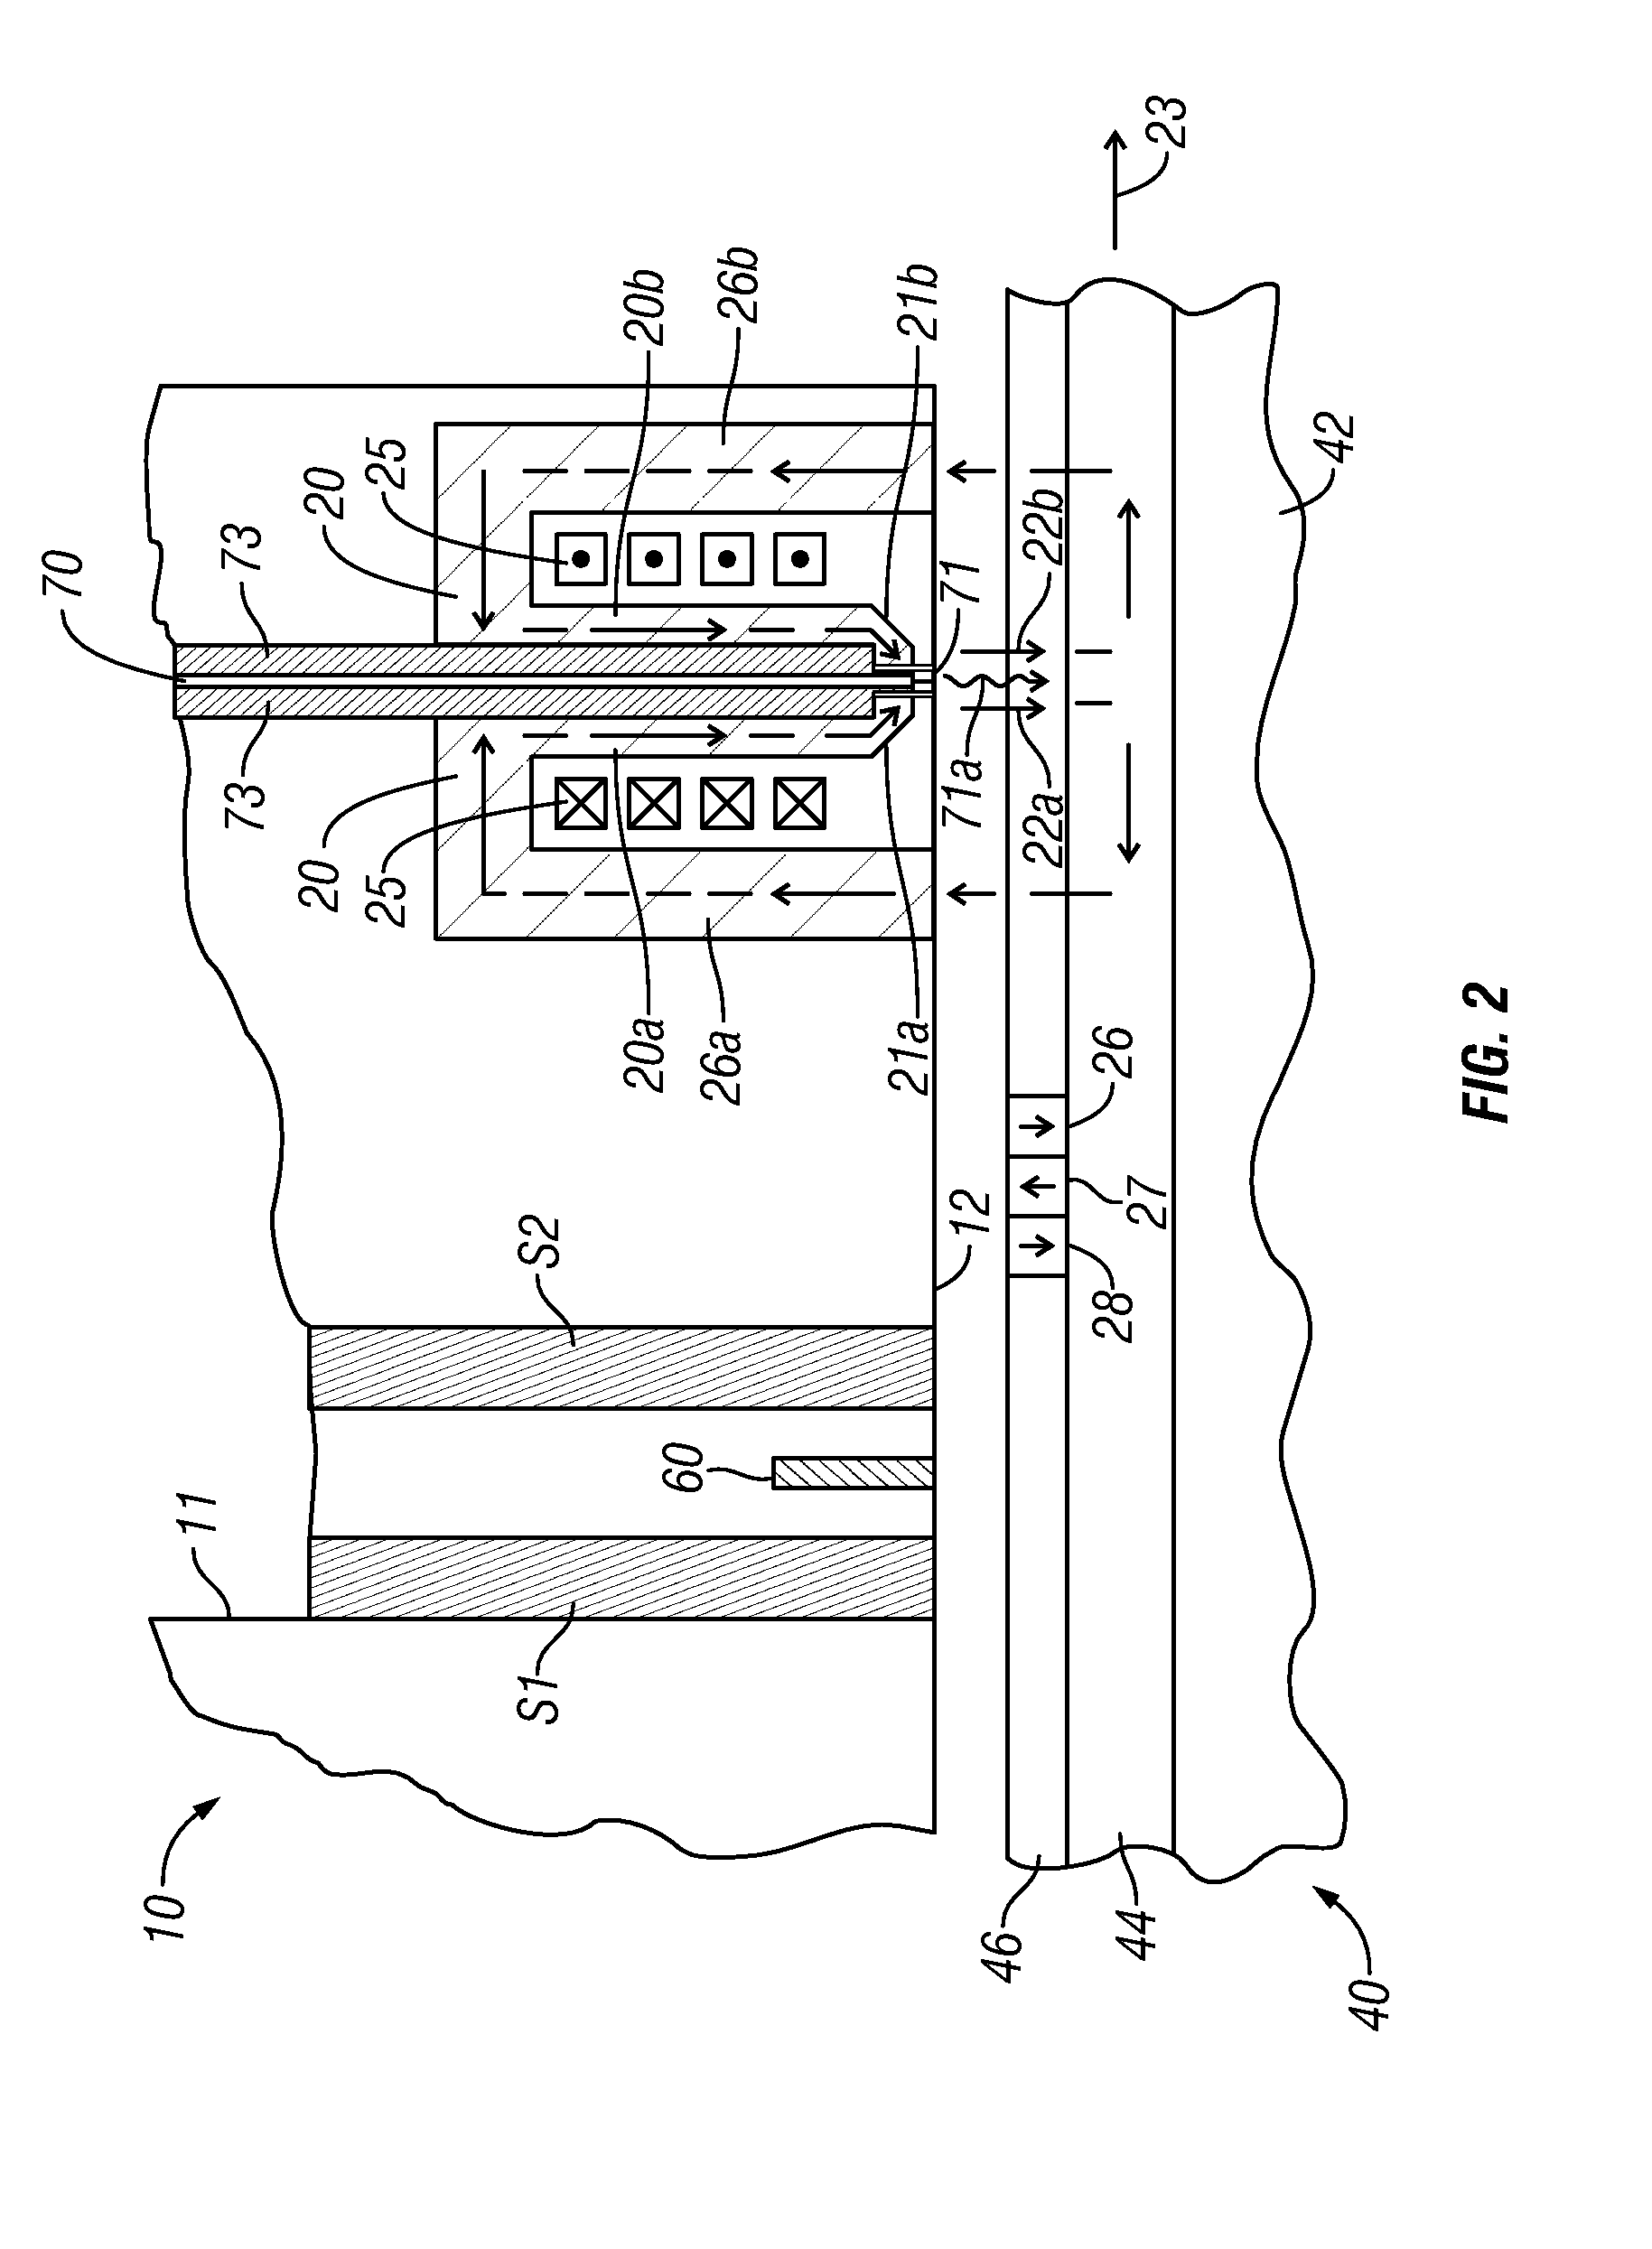 Thermally-assisted perpendicular magnetic recording system with write pole surrounding an optical channel and having recessed pole tip